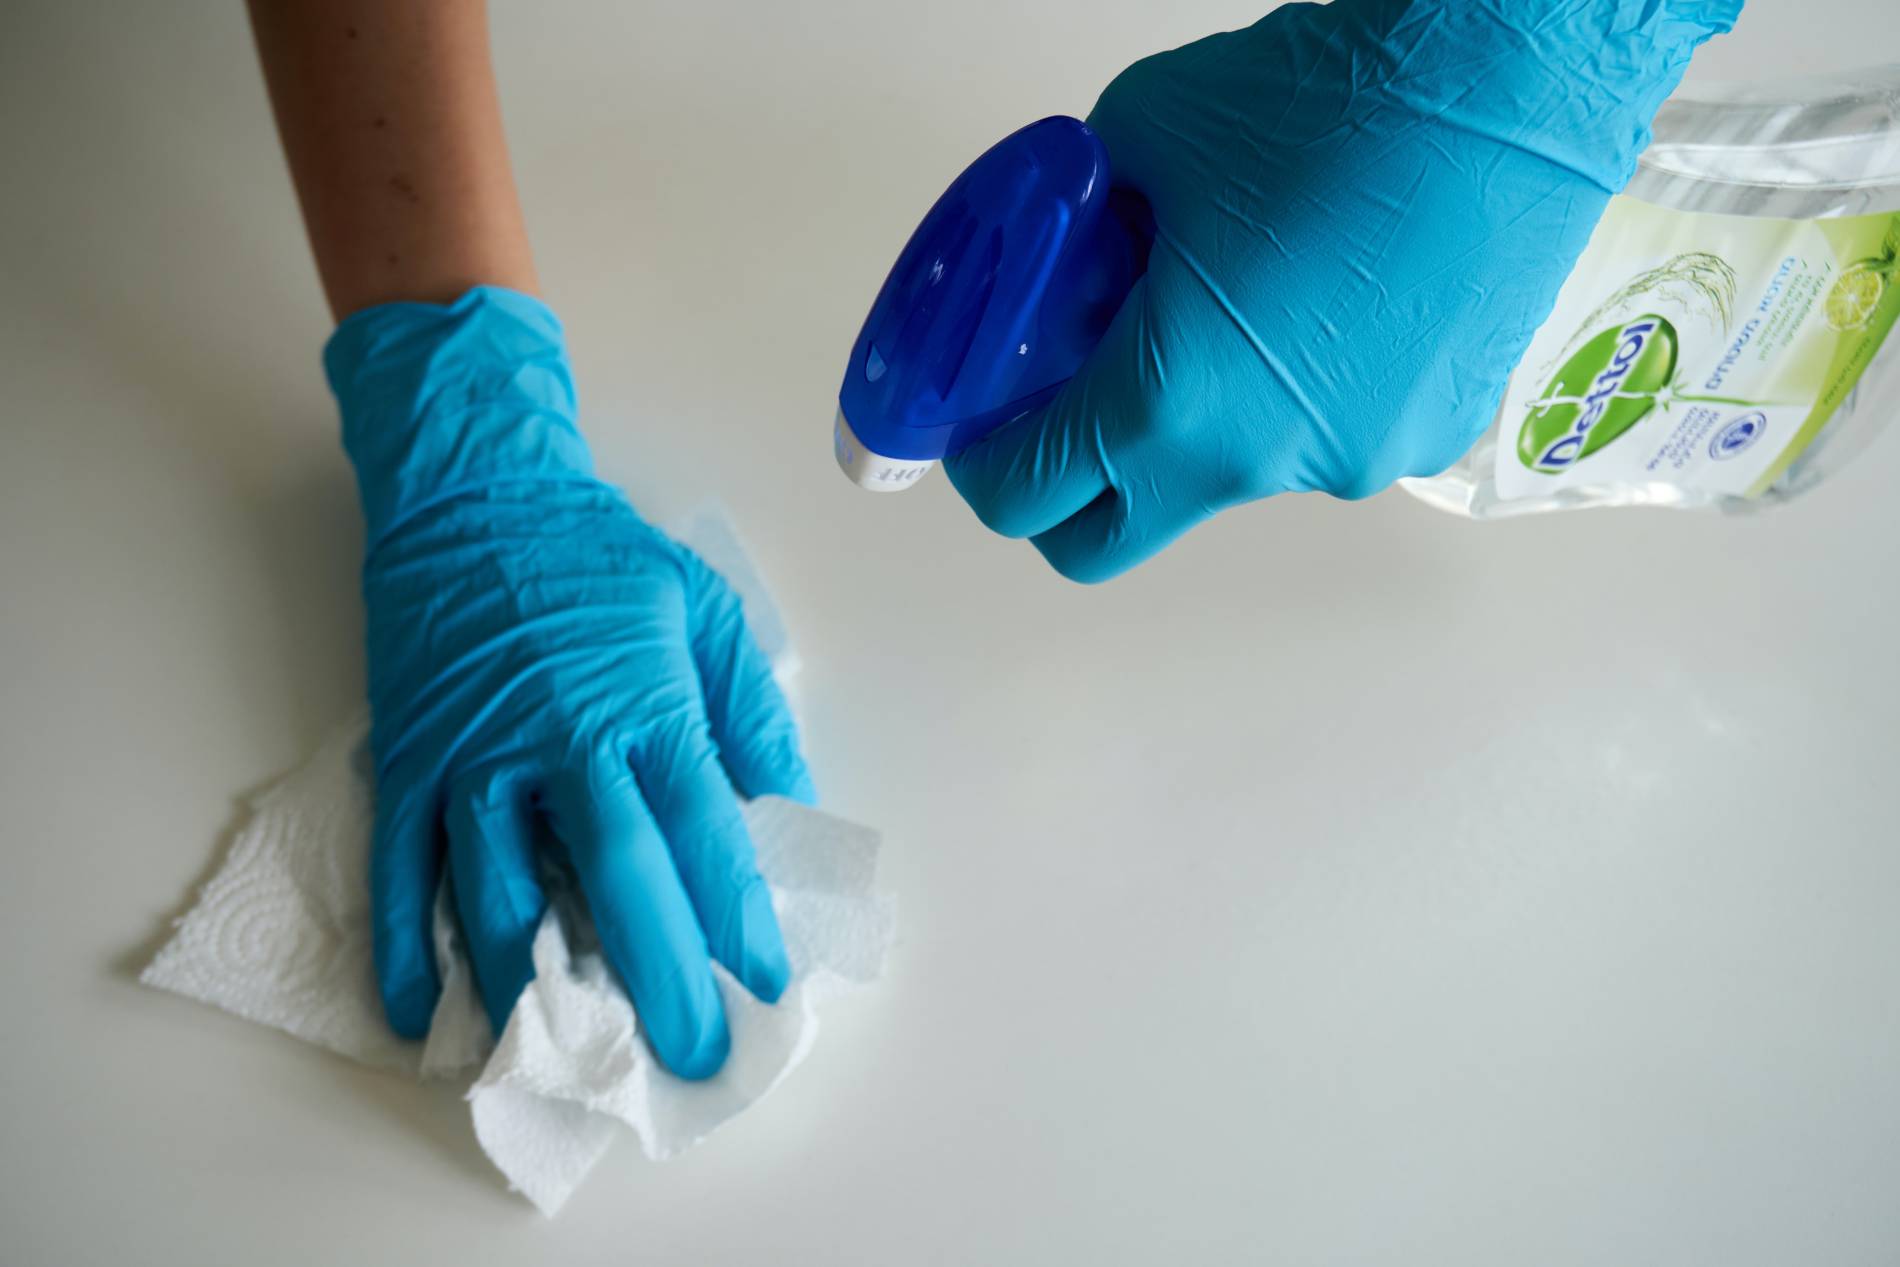 Person wearing gloves, holding a spray bottle and paper towel